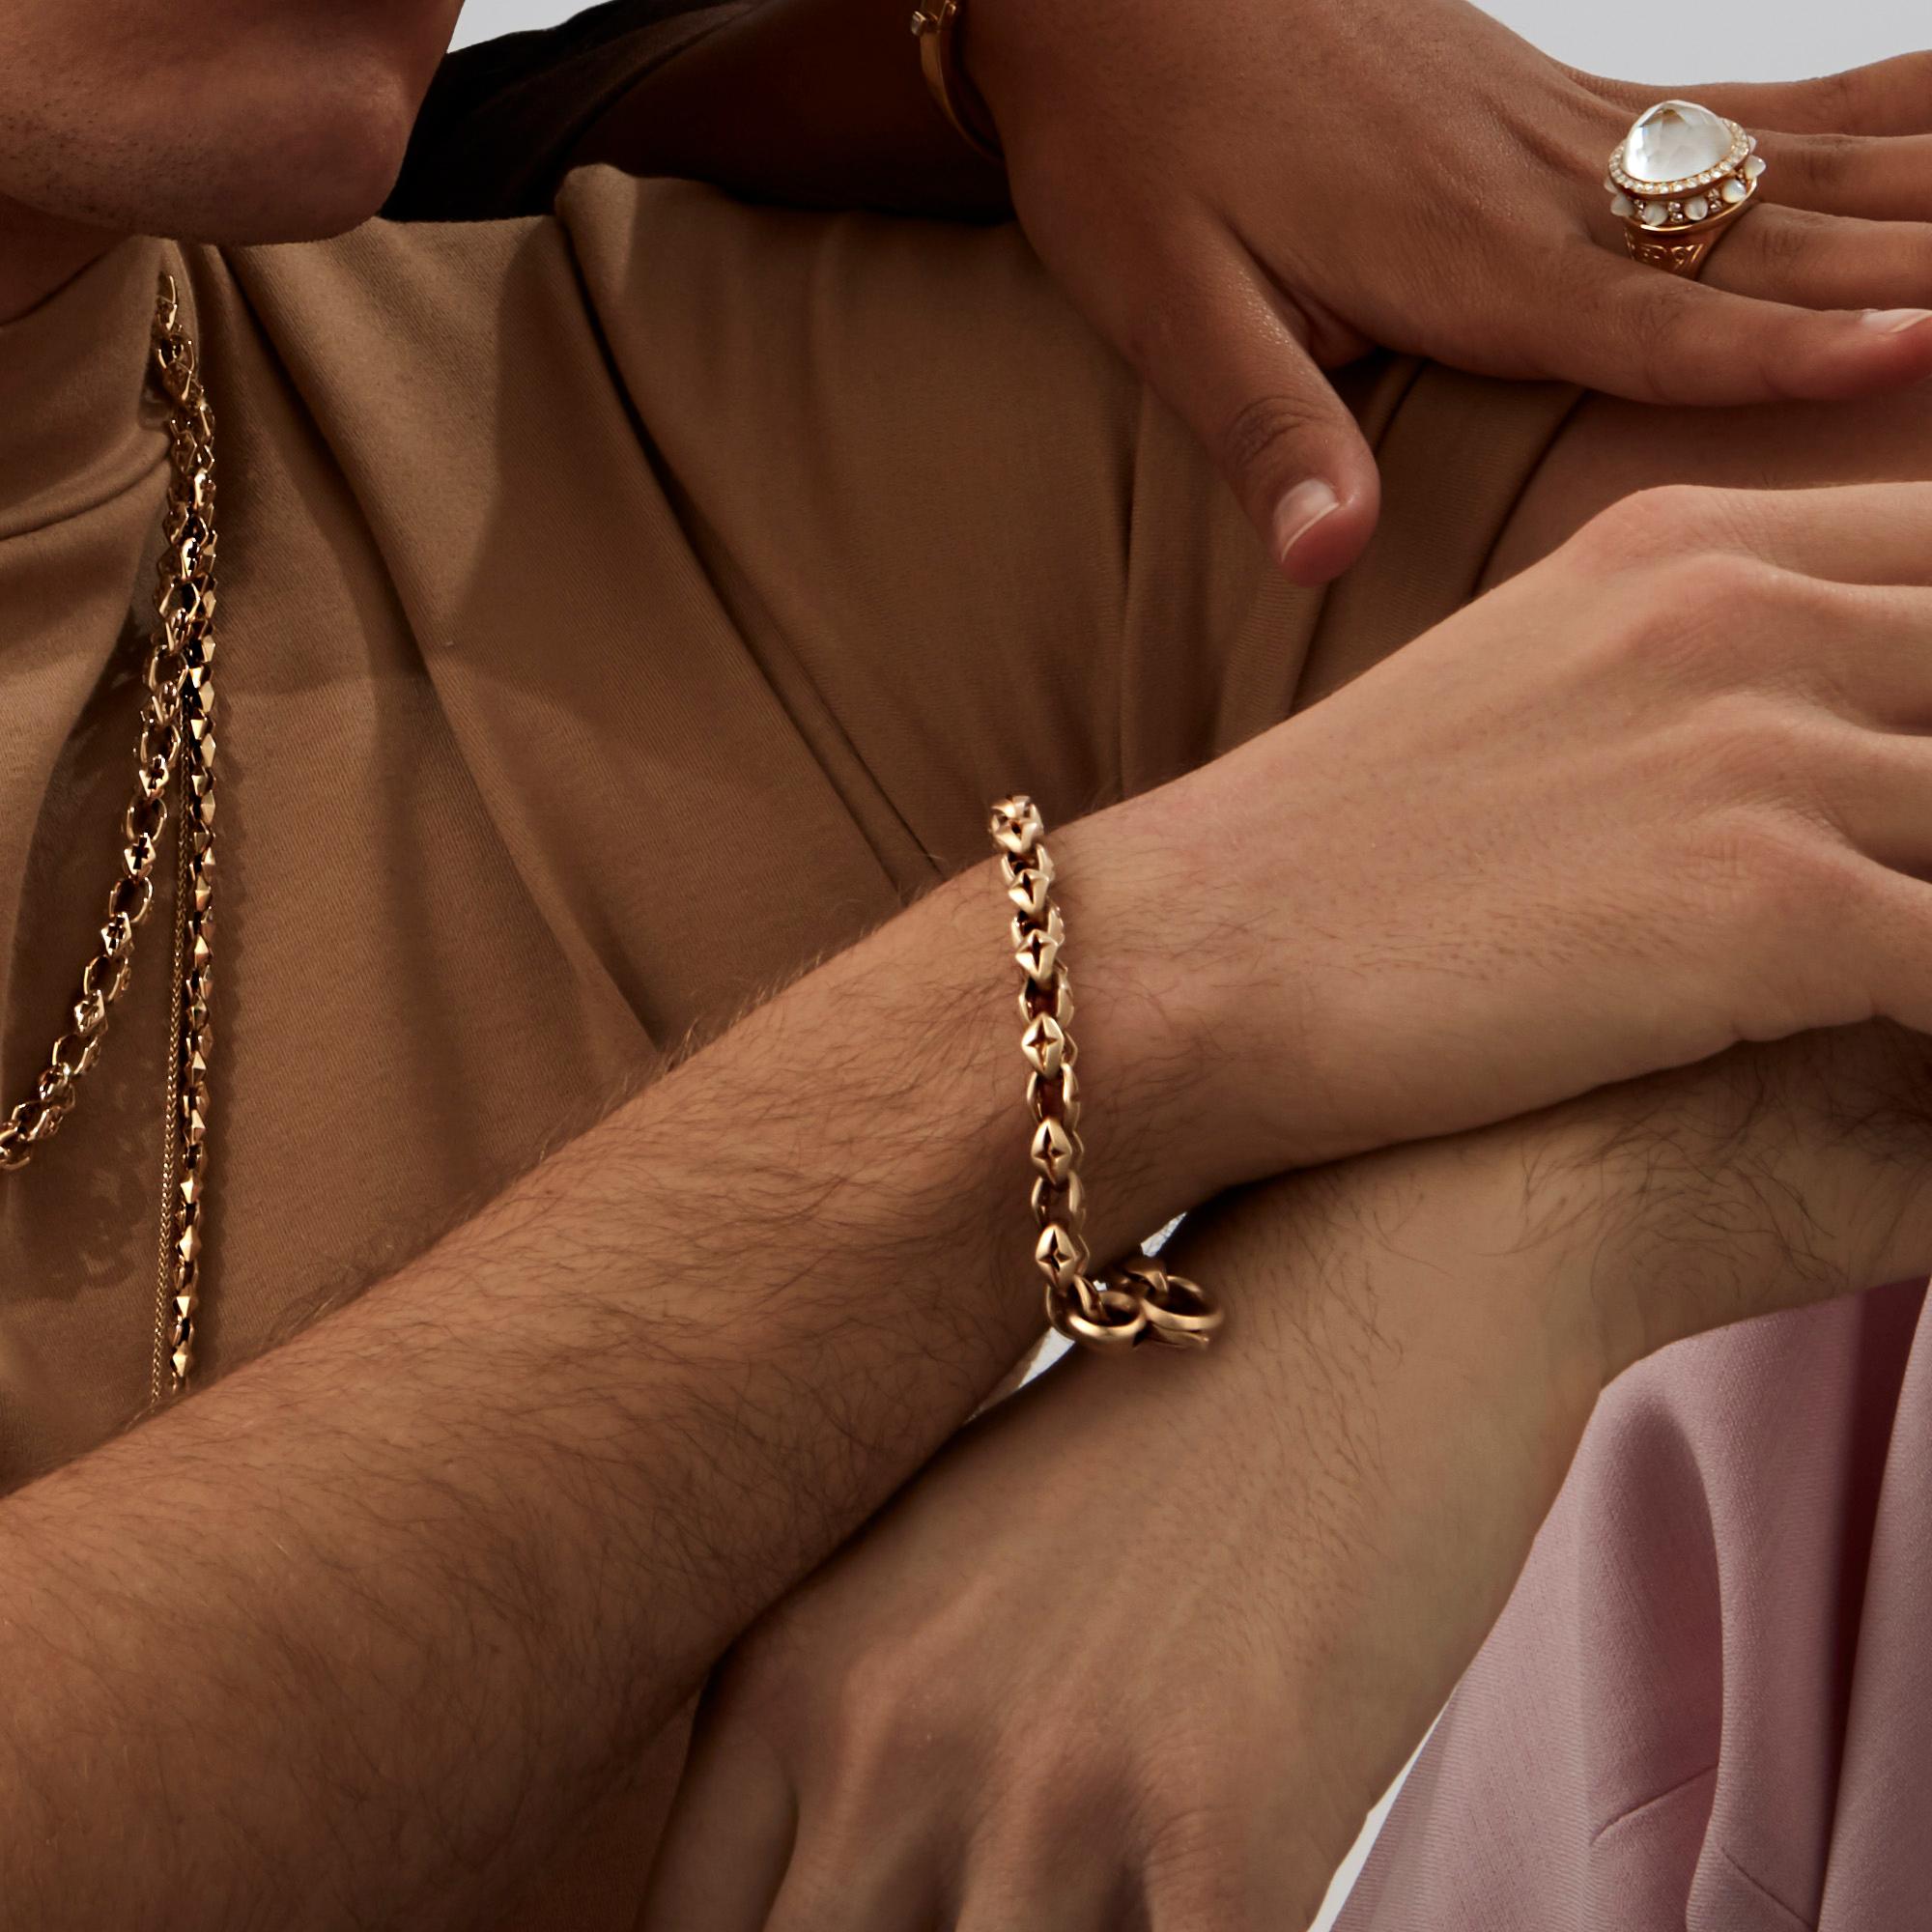 Featuring the New Cross motif, the 8-inch 18ct yellow Gold Crosslink Bracelet is a statement, handmade detailed chain that completely stands out from regular chains.

Please enquire for your exclusive price if your delivery country is outside of the